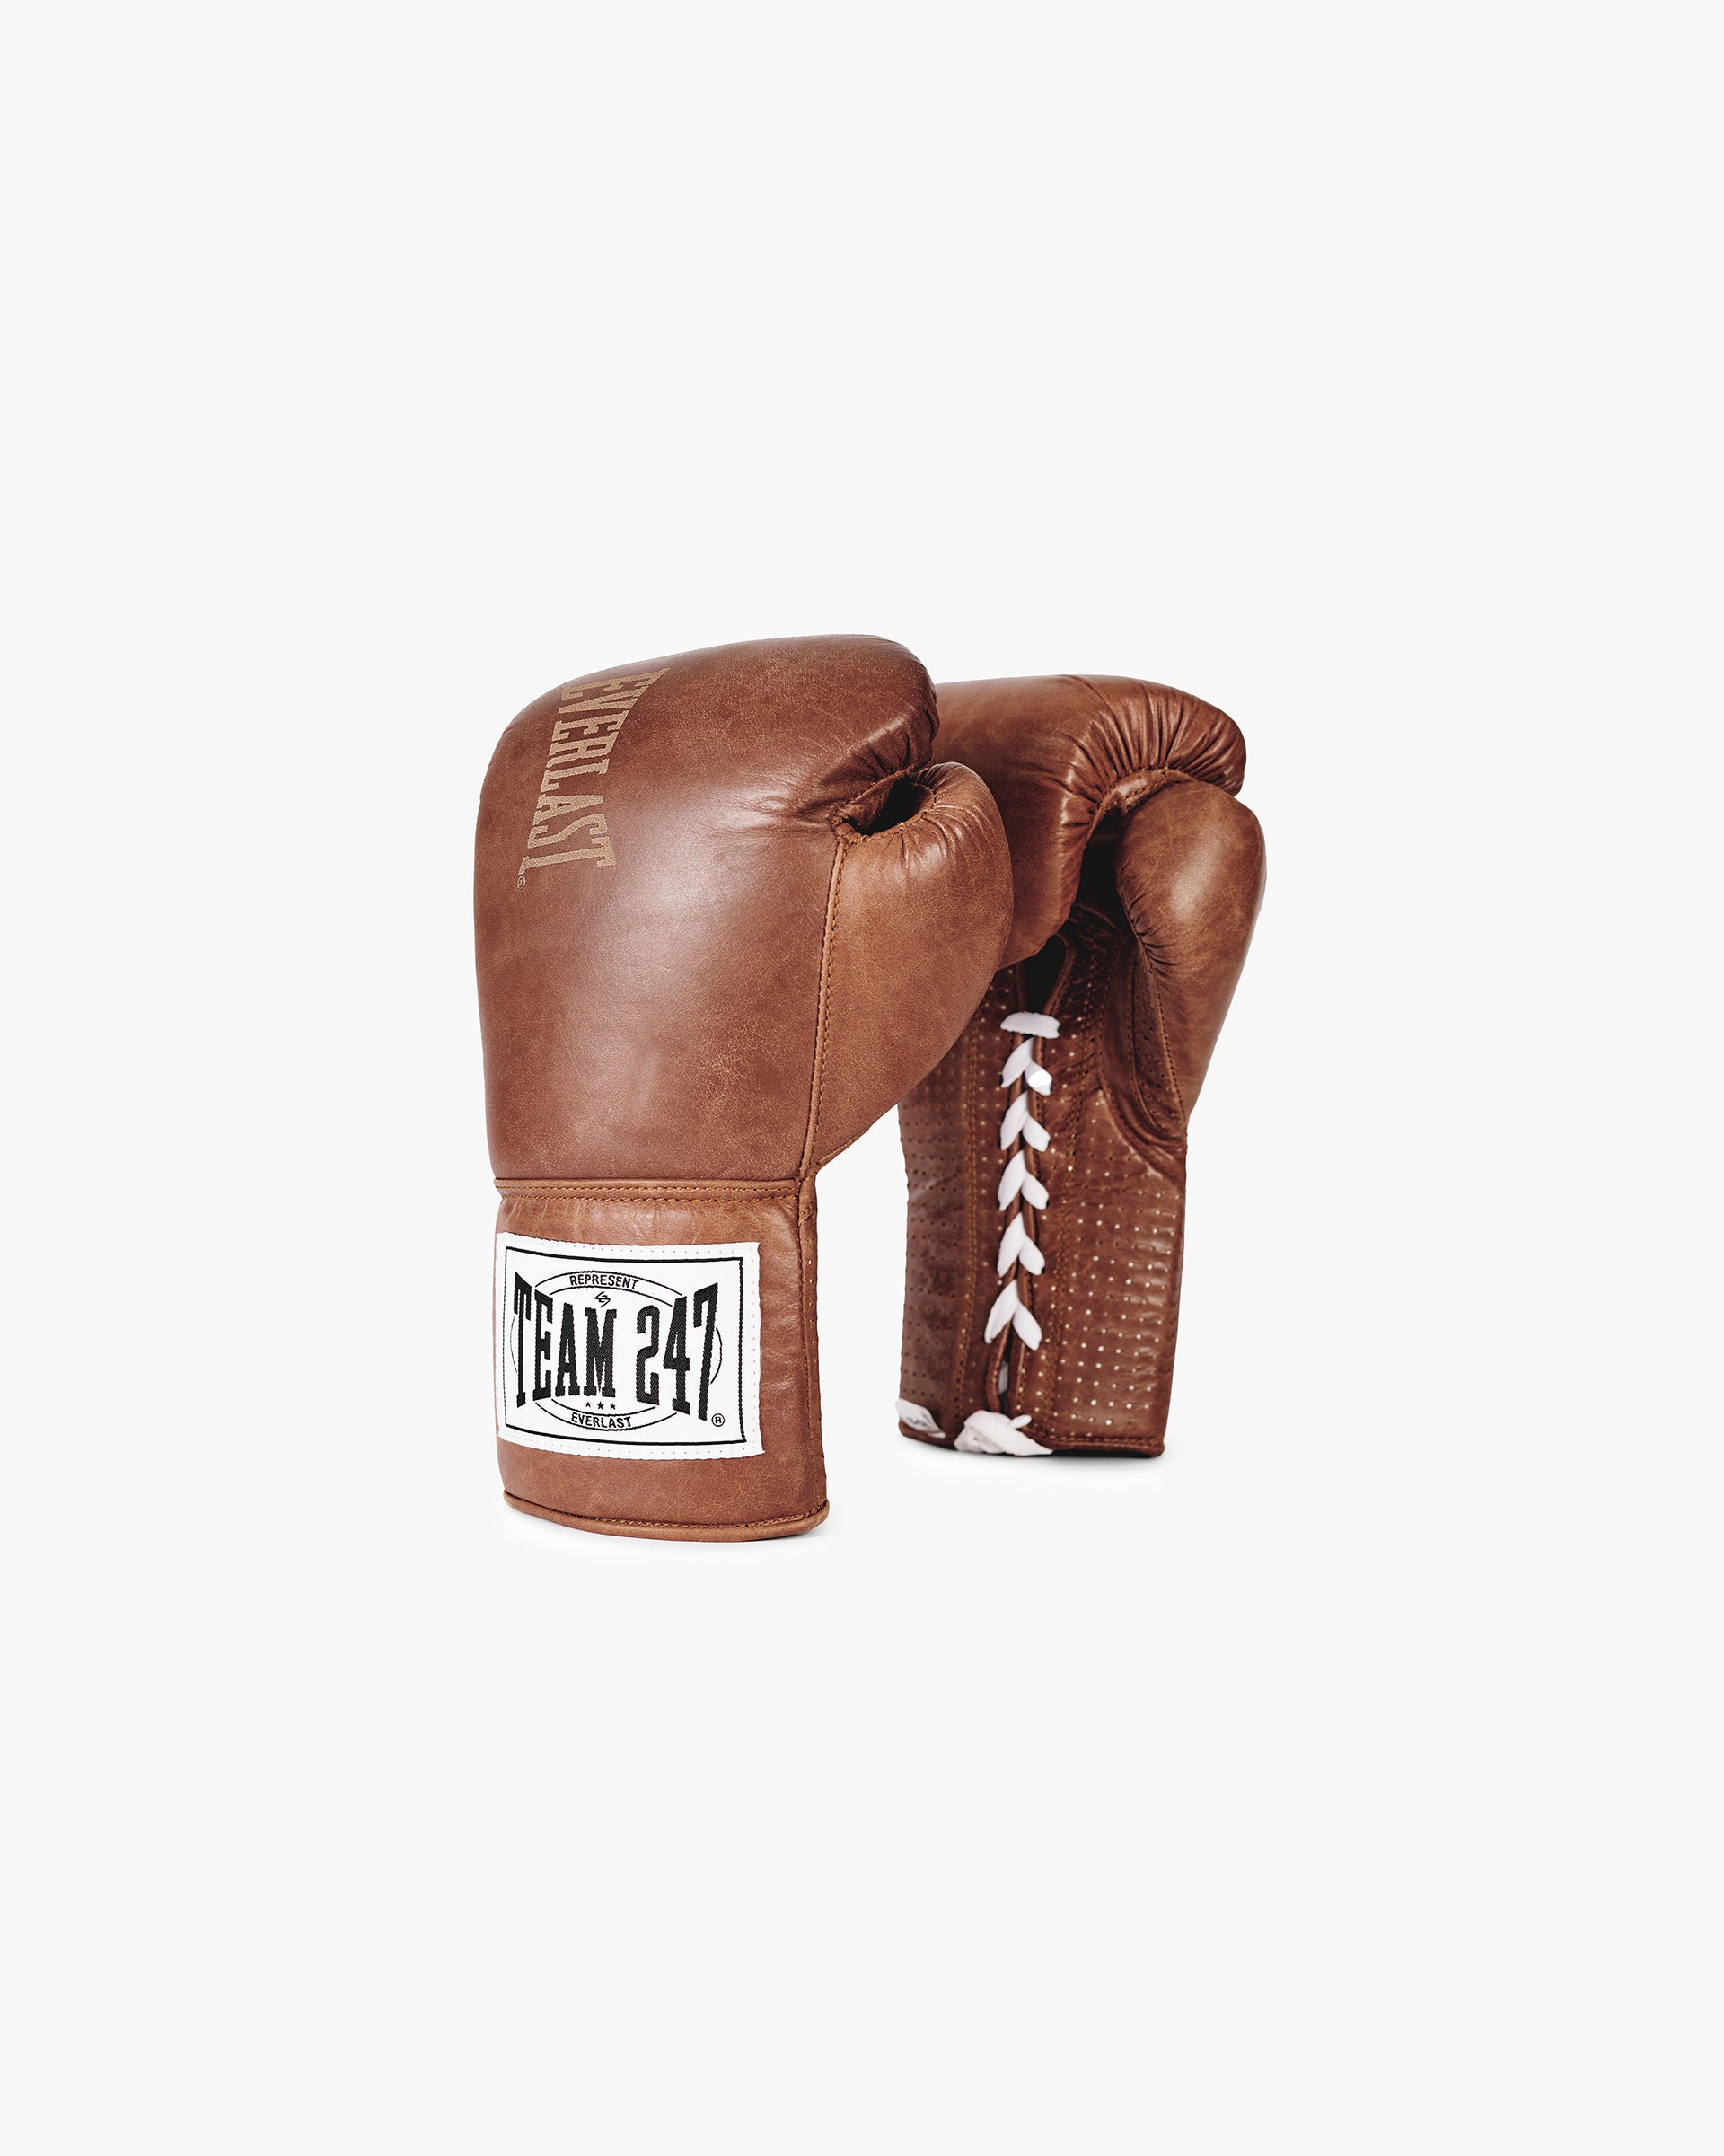 247 X Everlast Boxing Gloves - Washed Brown